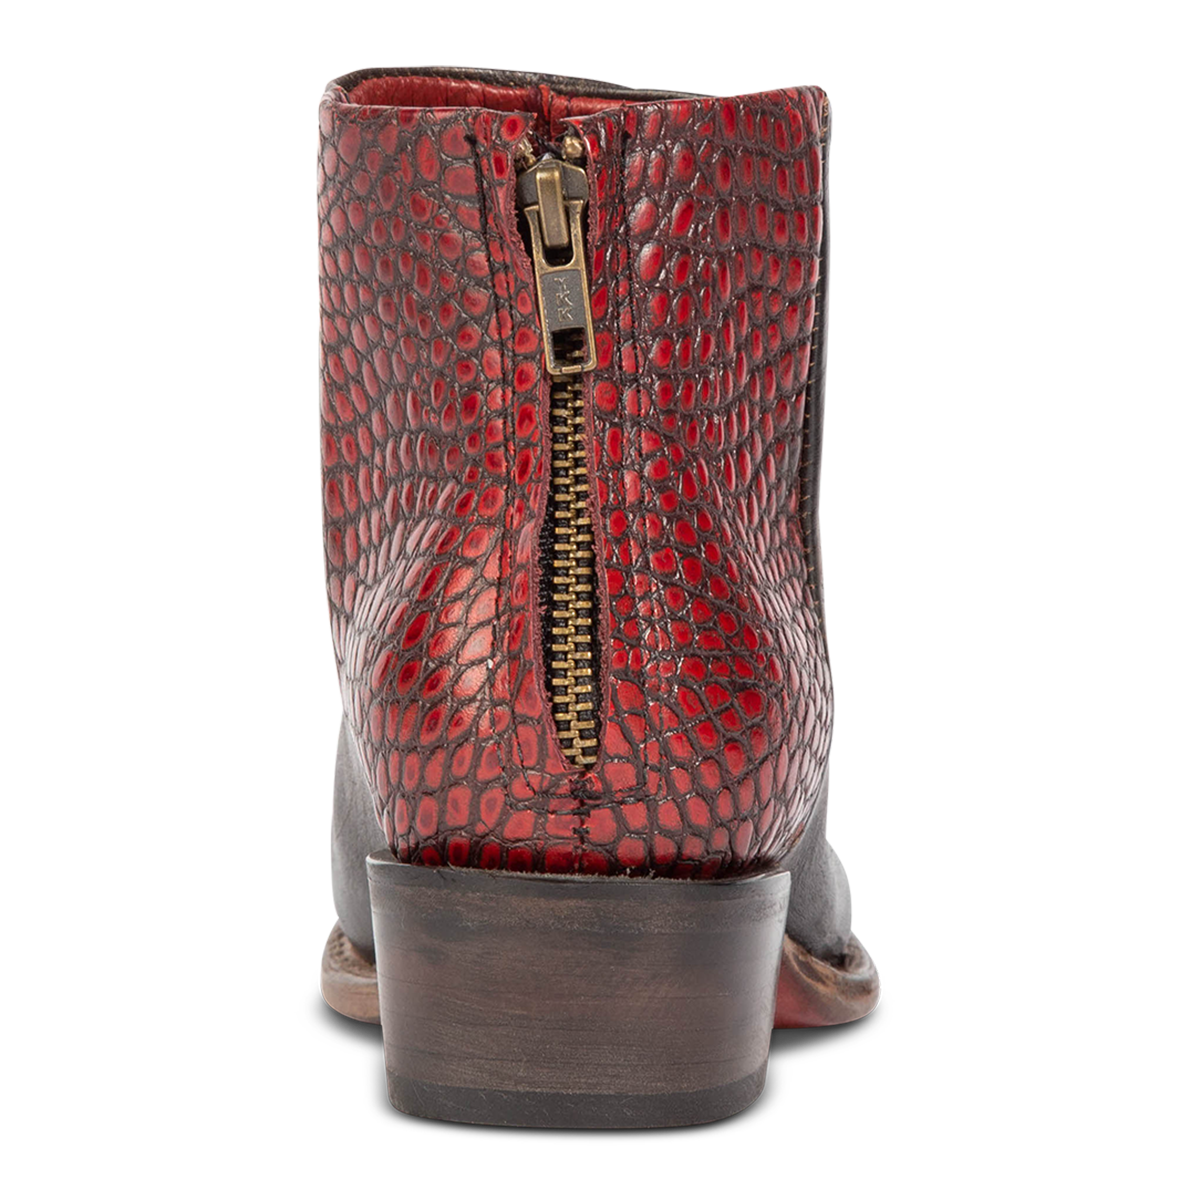 Back view showing wooden heel and zip closure on FREEBIRD women's Rule red croco multi leather bootie